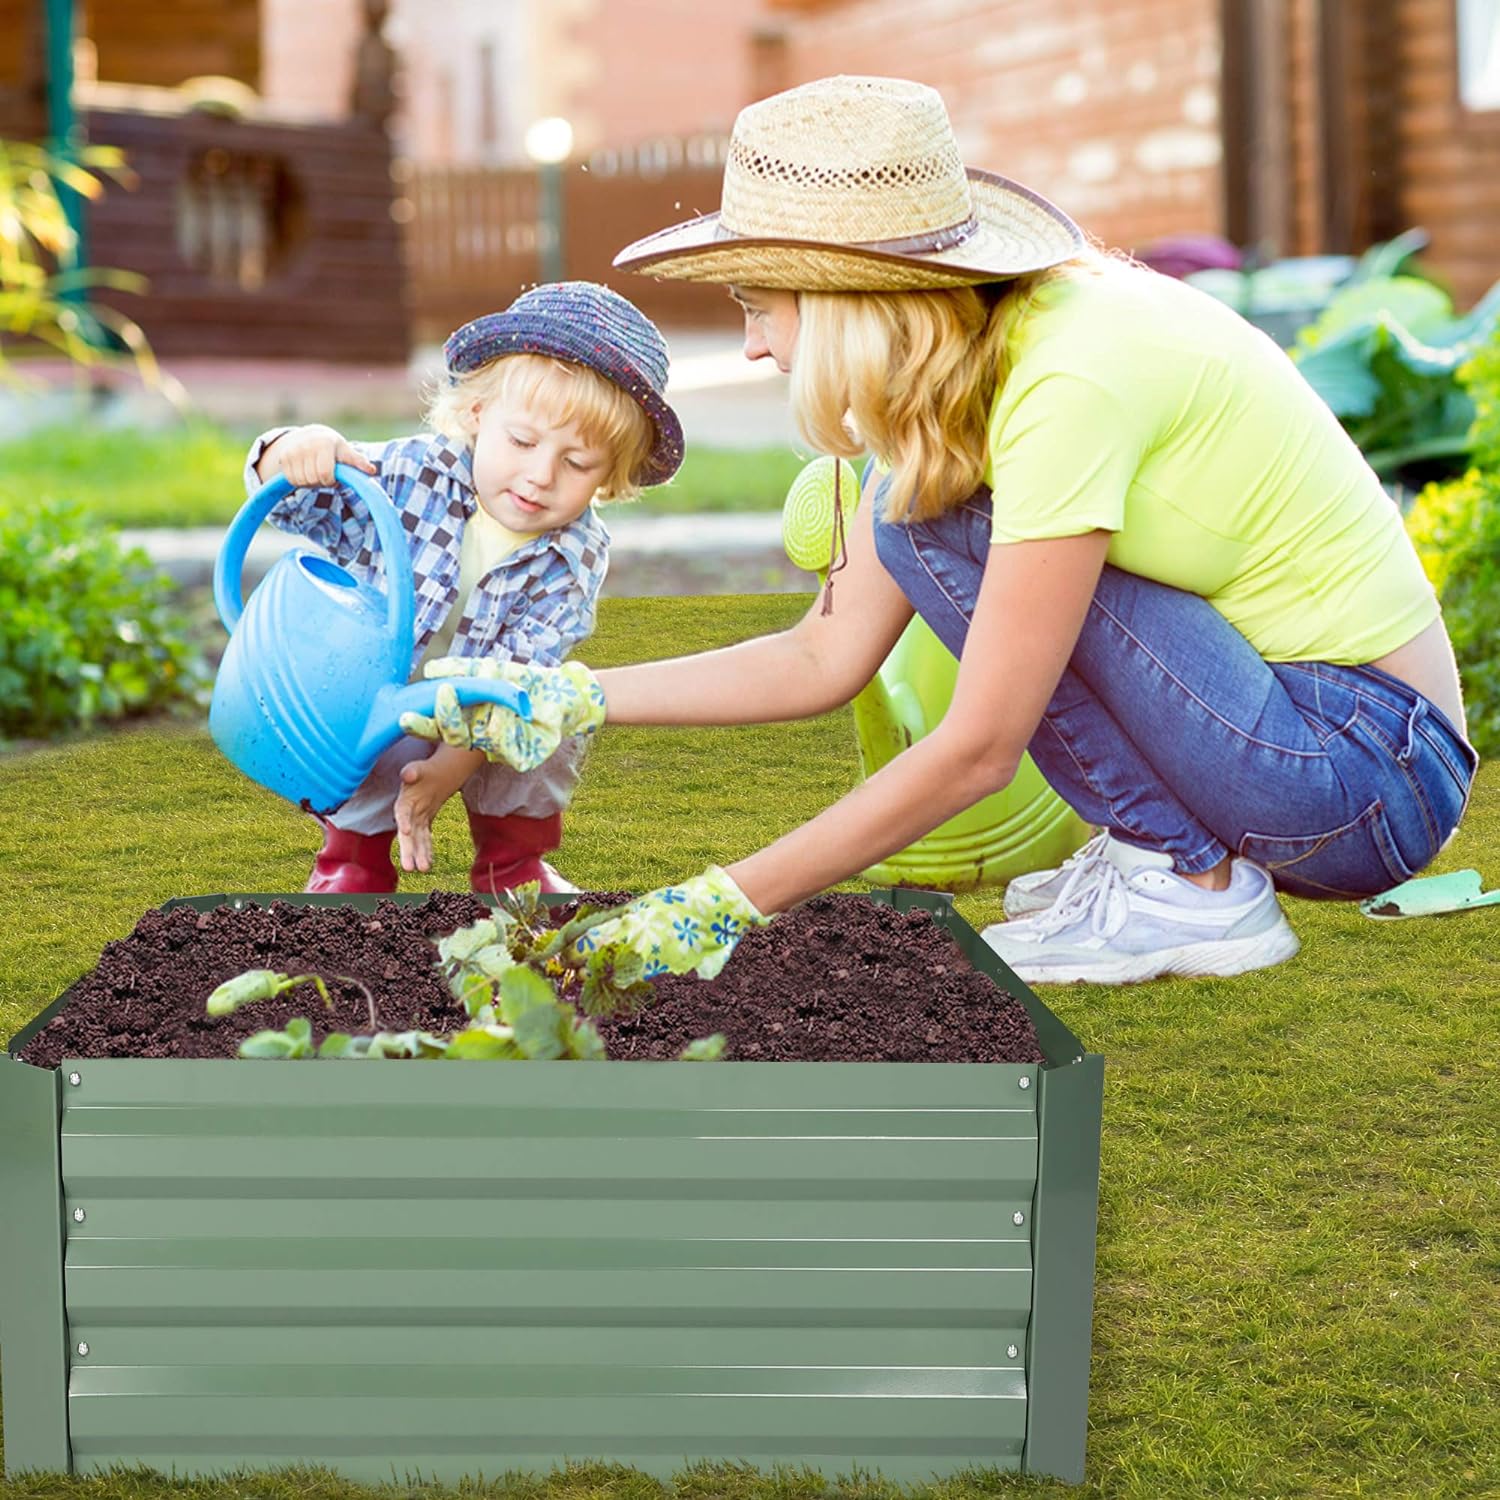 32"x32"x12" Raised Garden Bed Galvanized Planter Box Anti-Rust Coating Planting Vegetables Herbs and Flowers